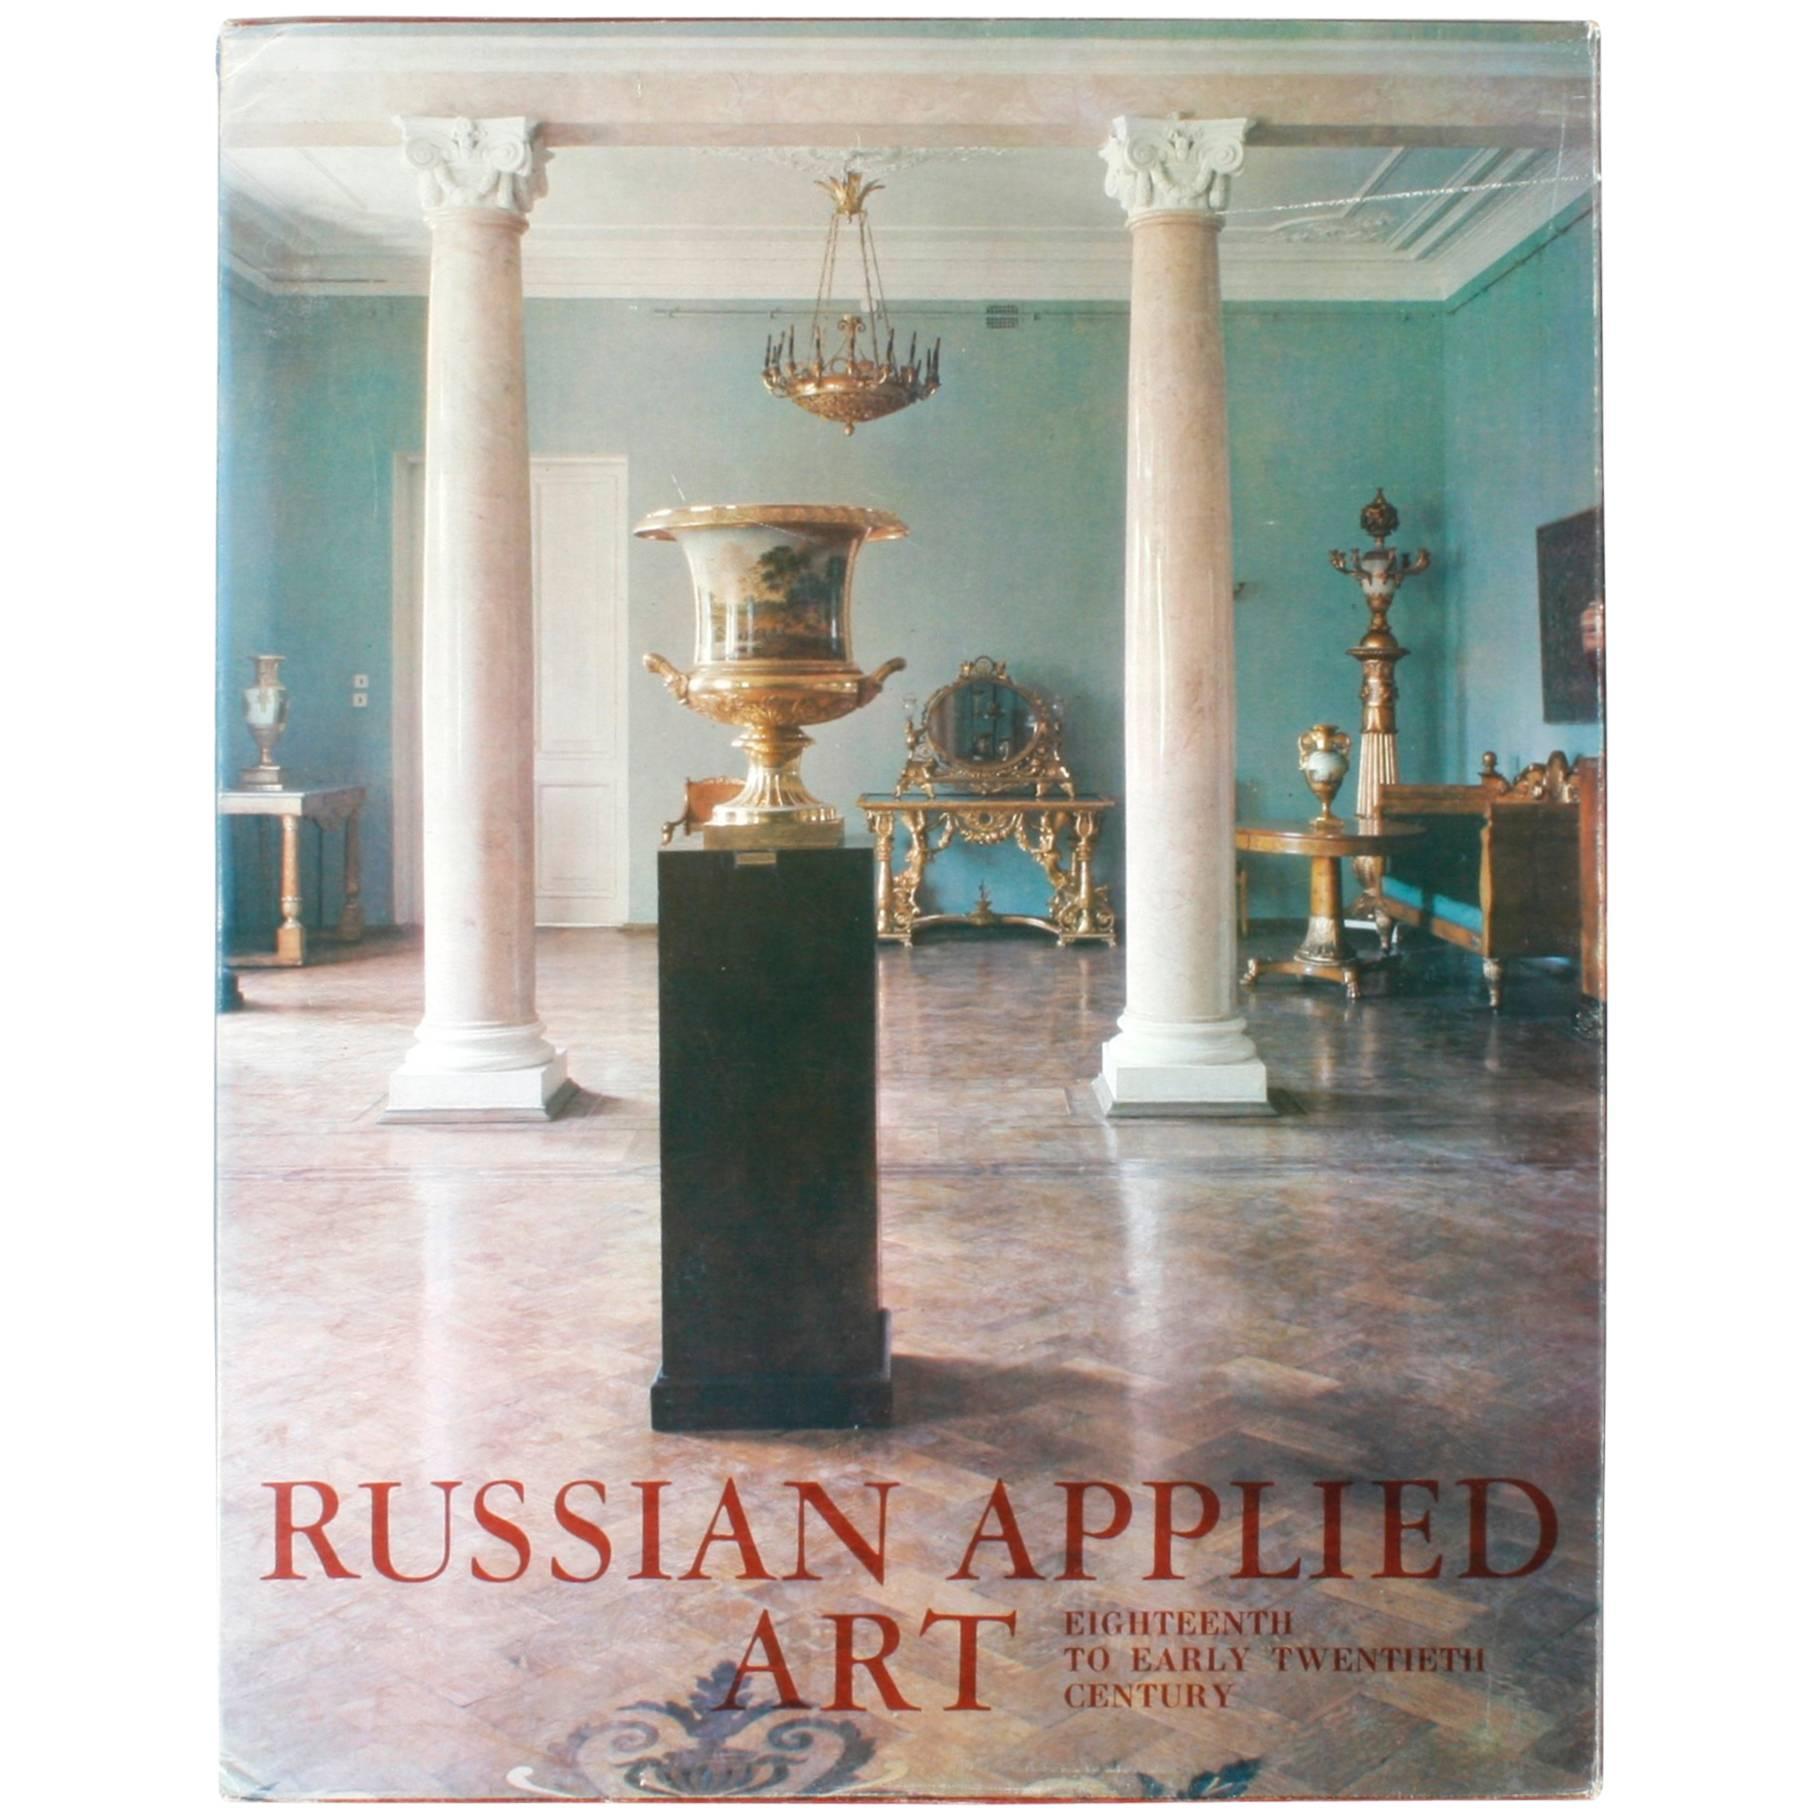 Russian Applied Art, First Edition